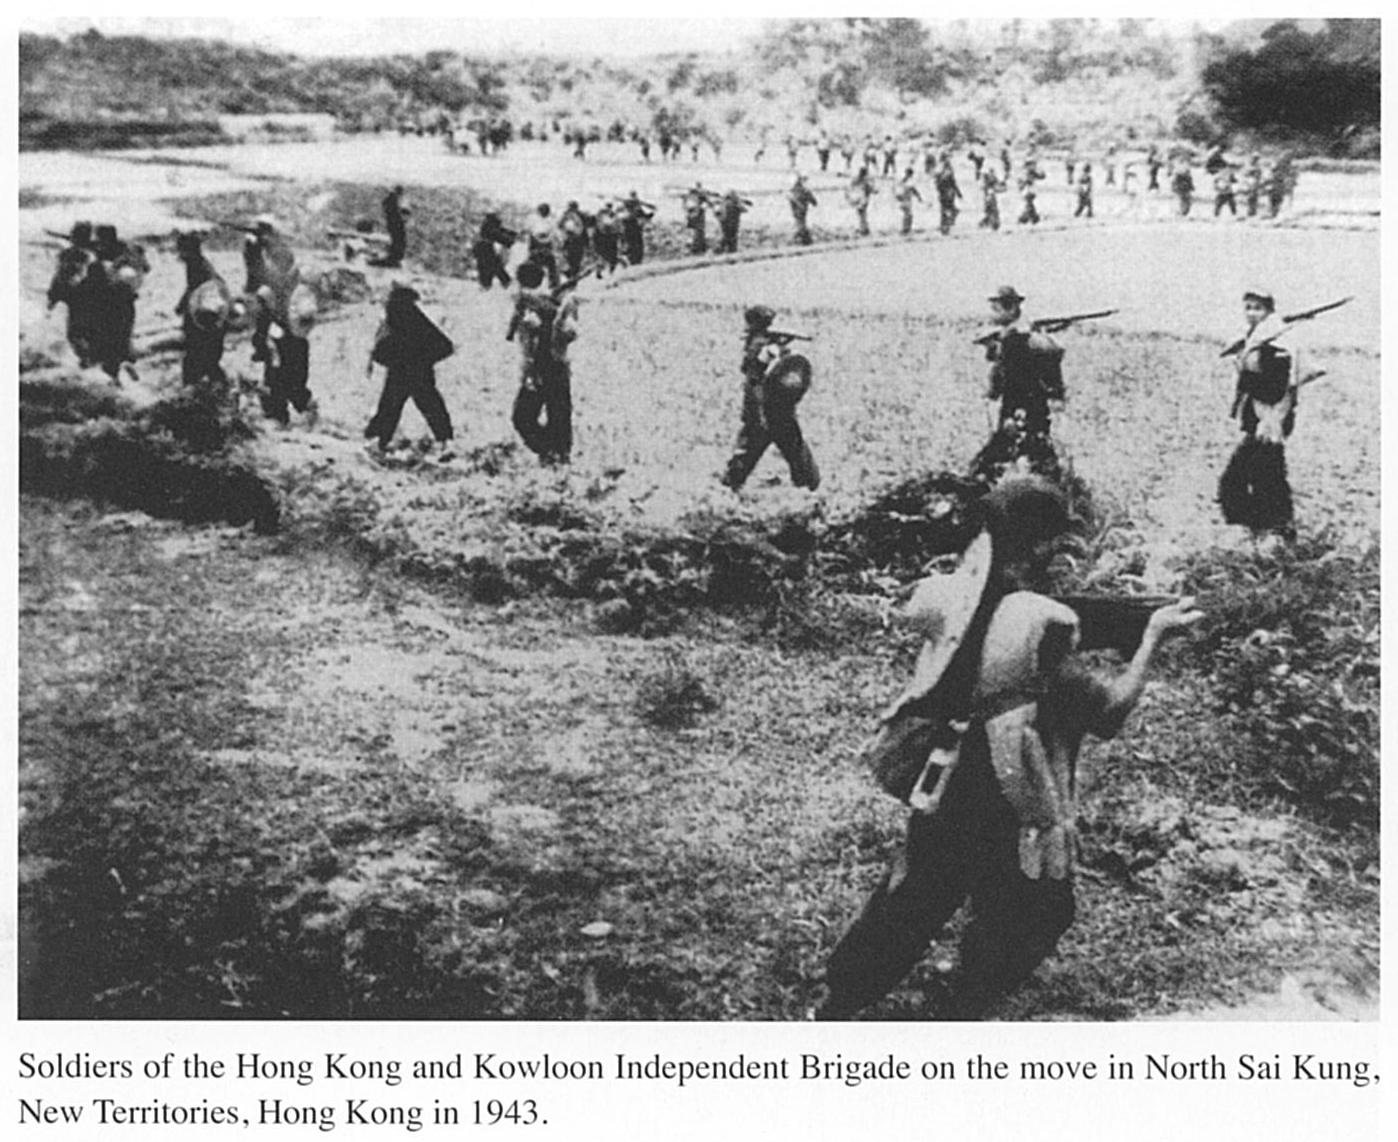 Soldiers of the Hong Kong and Kowloon Independent Brigade on the move in North Sai Kung in 1943. Photo: East River Column by Chan Sui-jeung